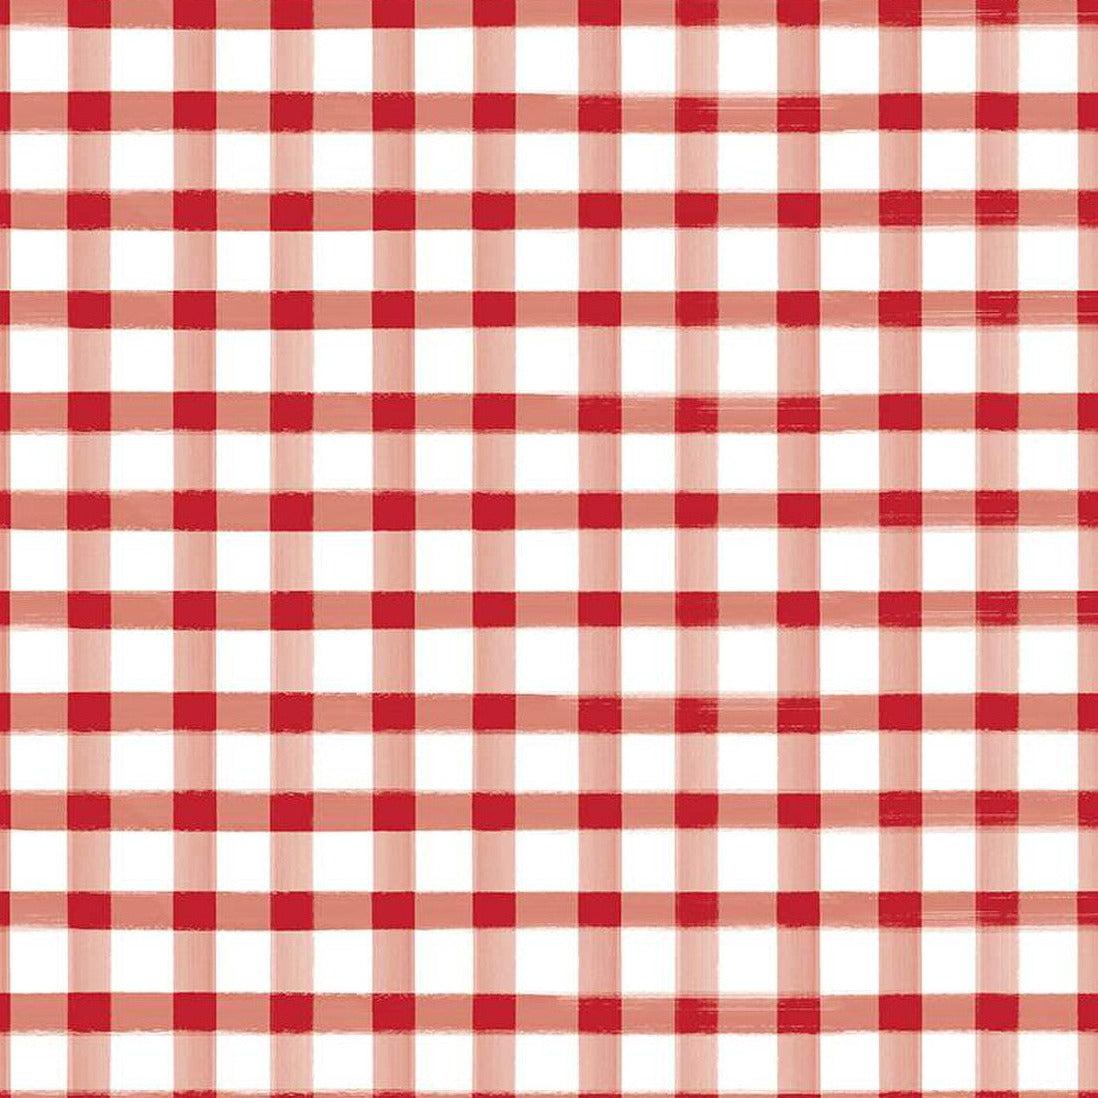 Monthly Placemats 2 December Red Gingham Fabric